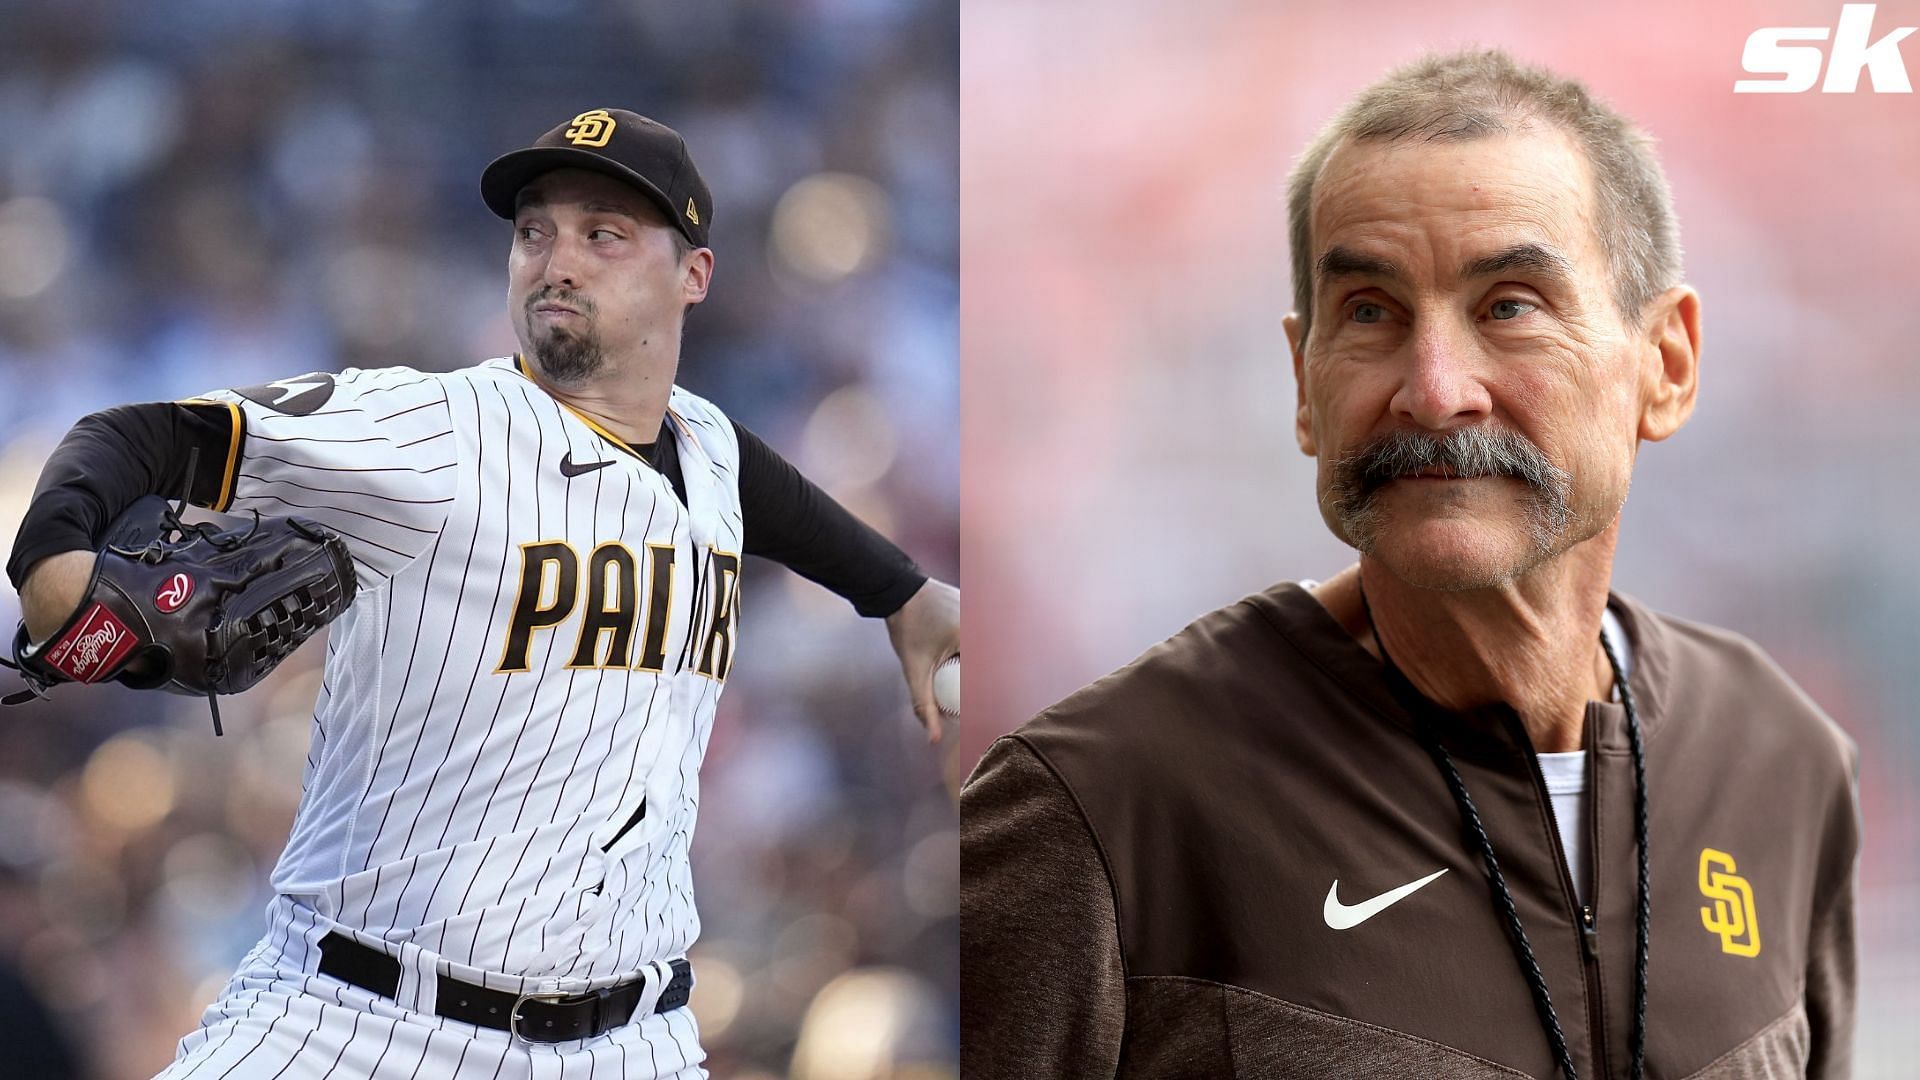 2023 Cy Young winner Blake Snell pays emotional tribute to late Padres owner Peter Seidler